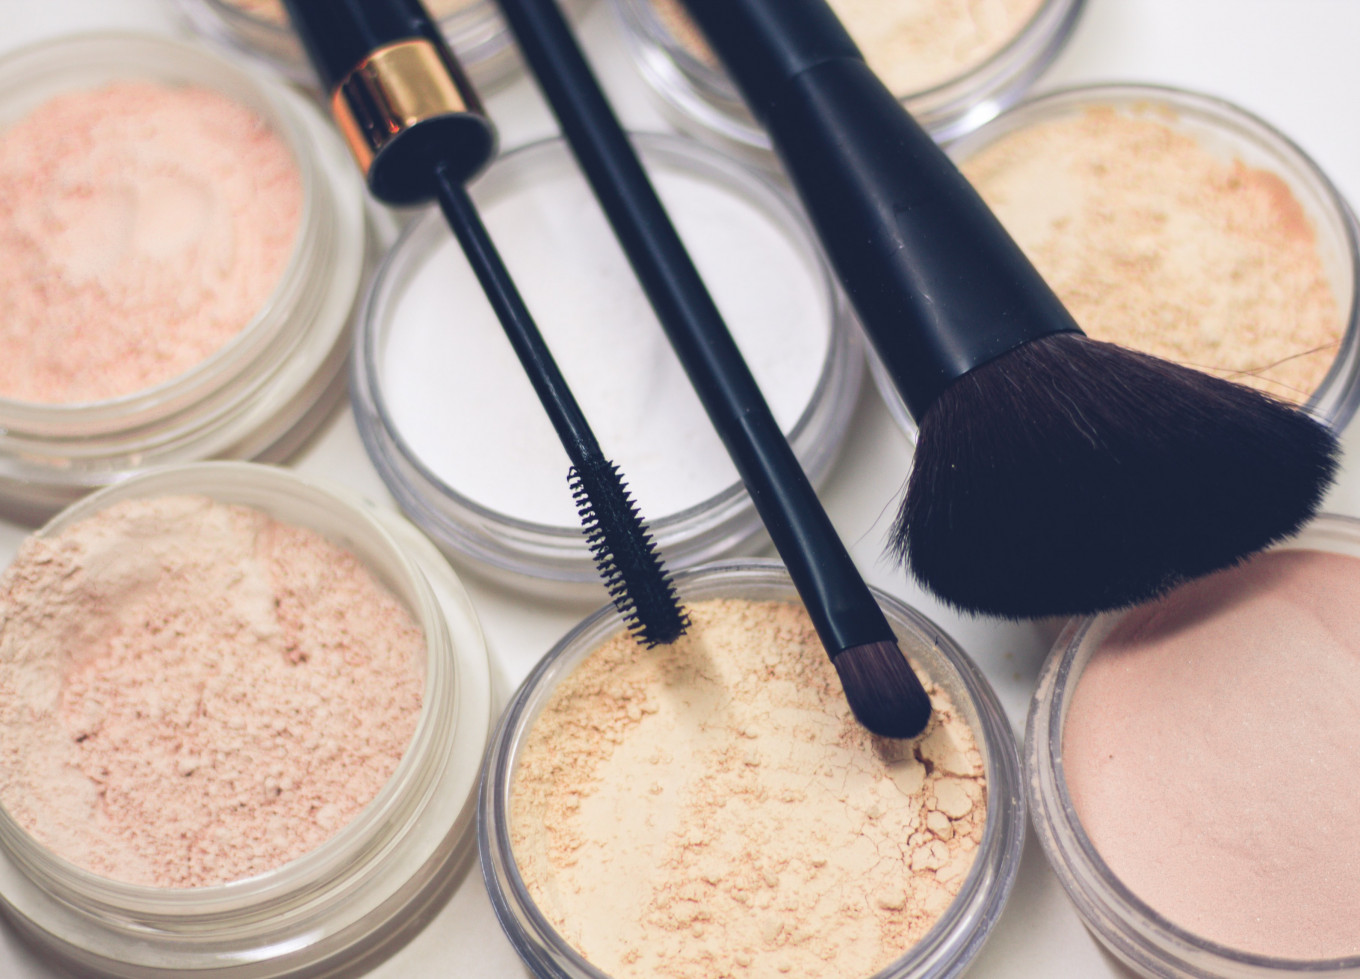 Staying beautiful during the pandemic: Makeup experts share their tips – Mon, August 1 2022